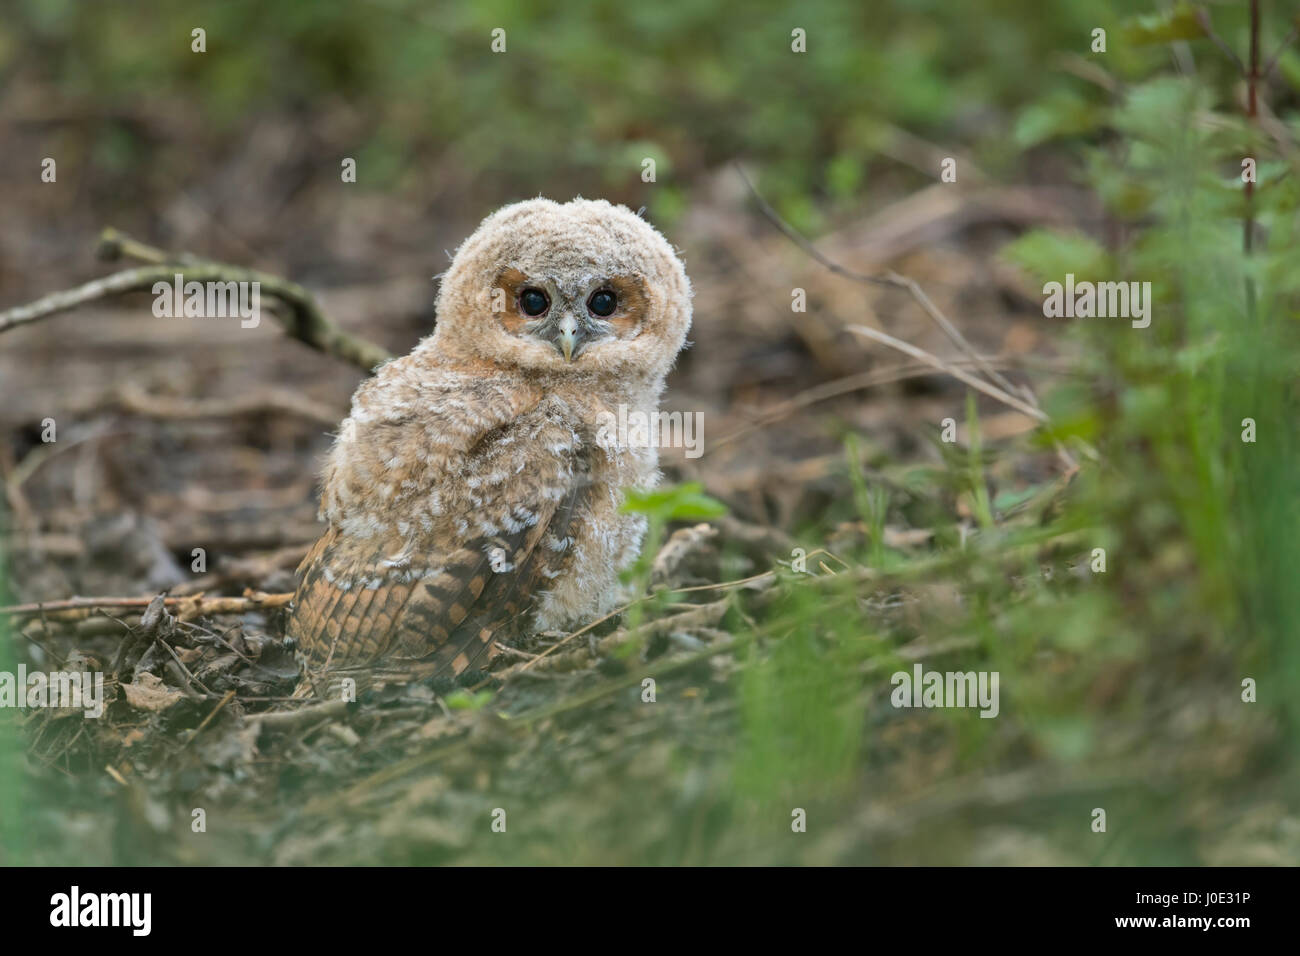 Tawny Owl / Waldkauz (Strix aluco), very young fledgling, sitting on the ground of a forest, dark eyes wide open, cute and funny. Stock Photo